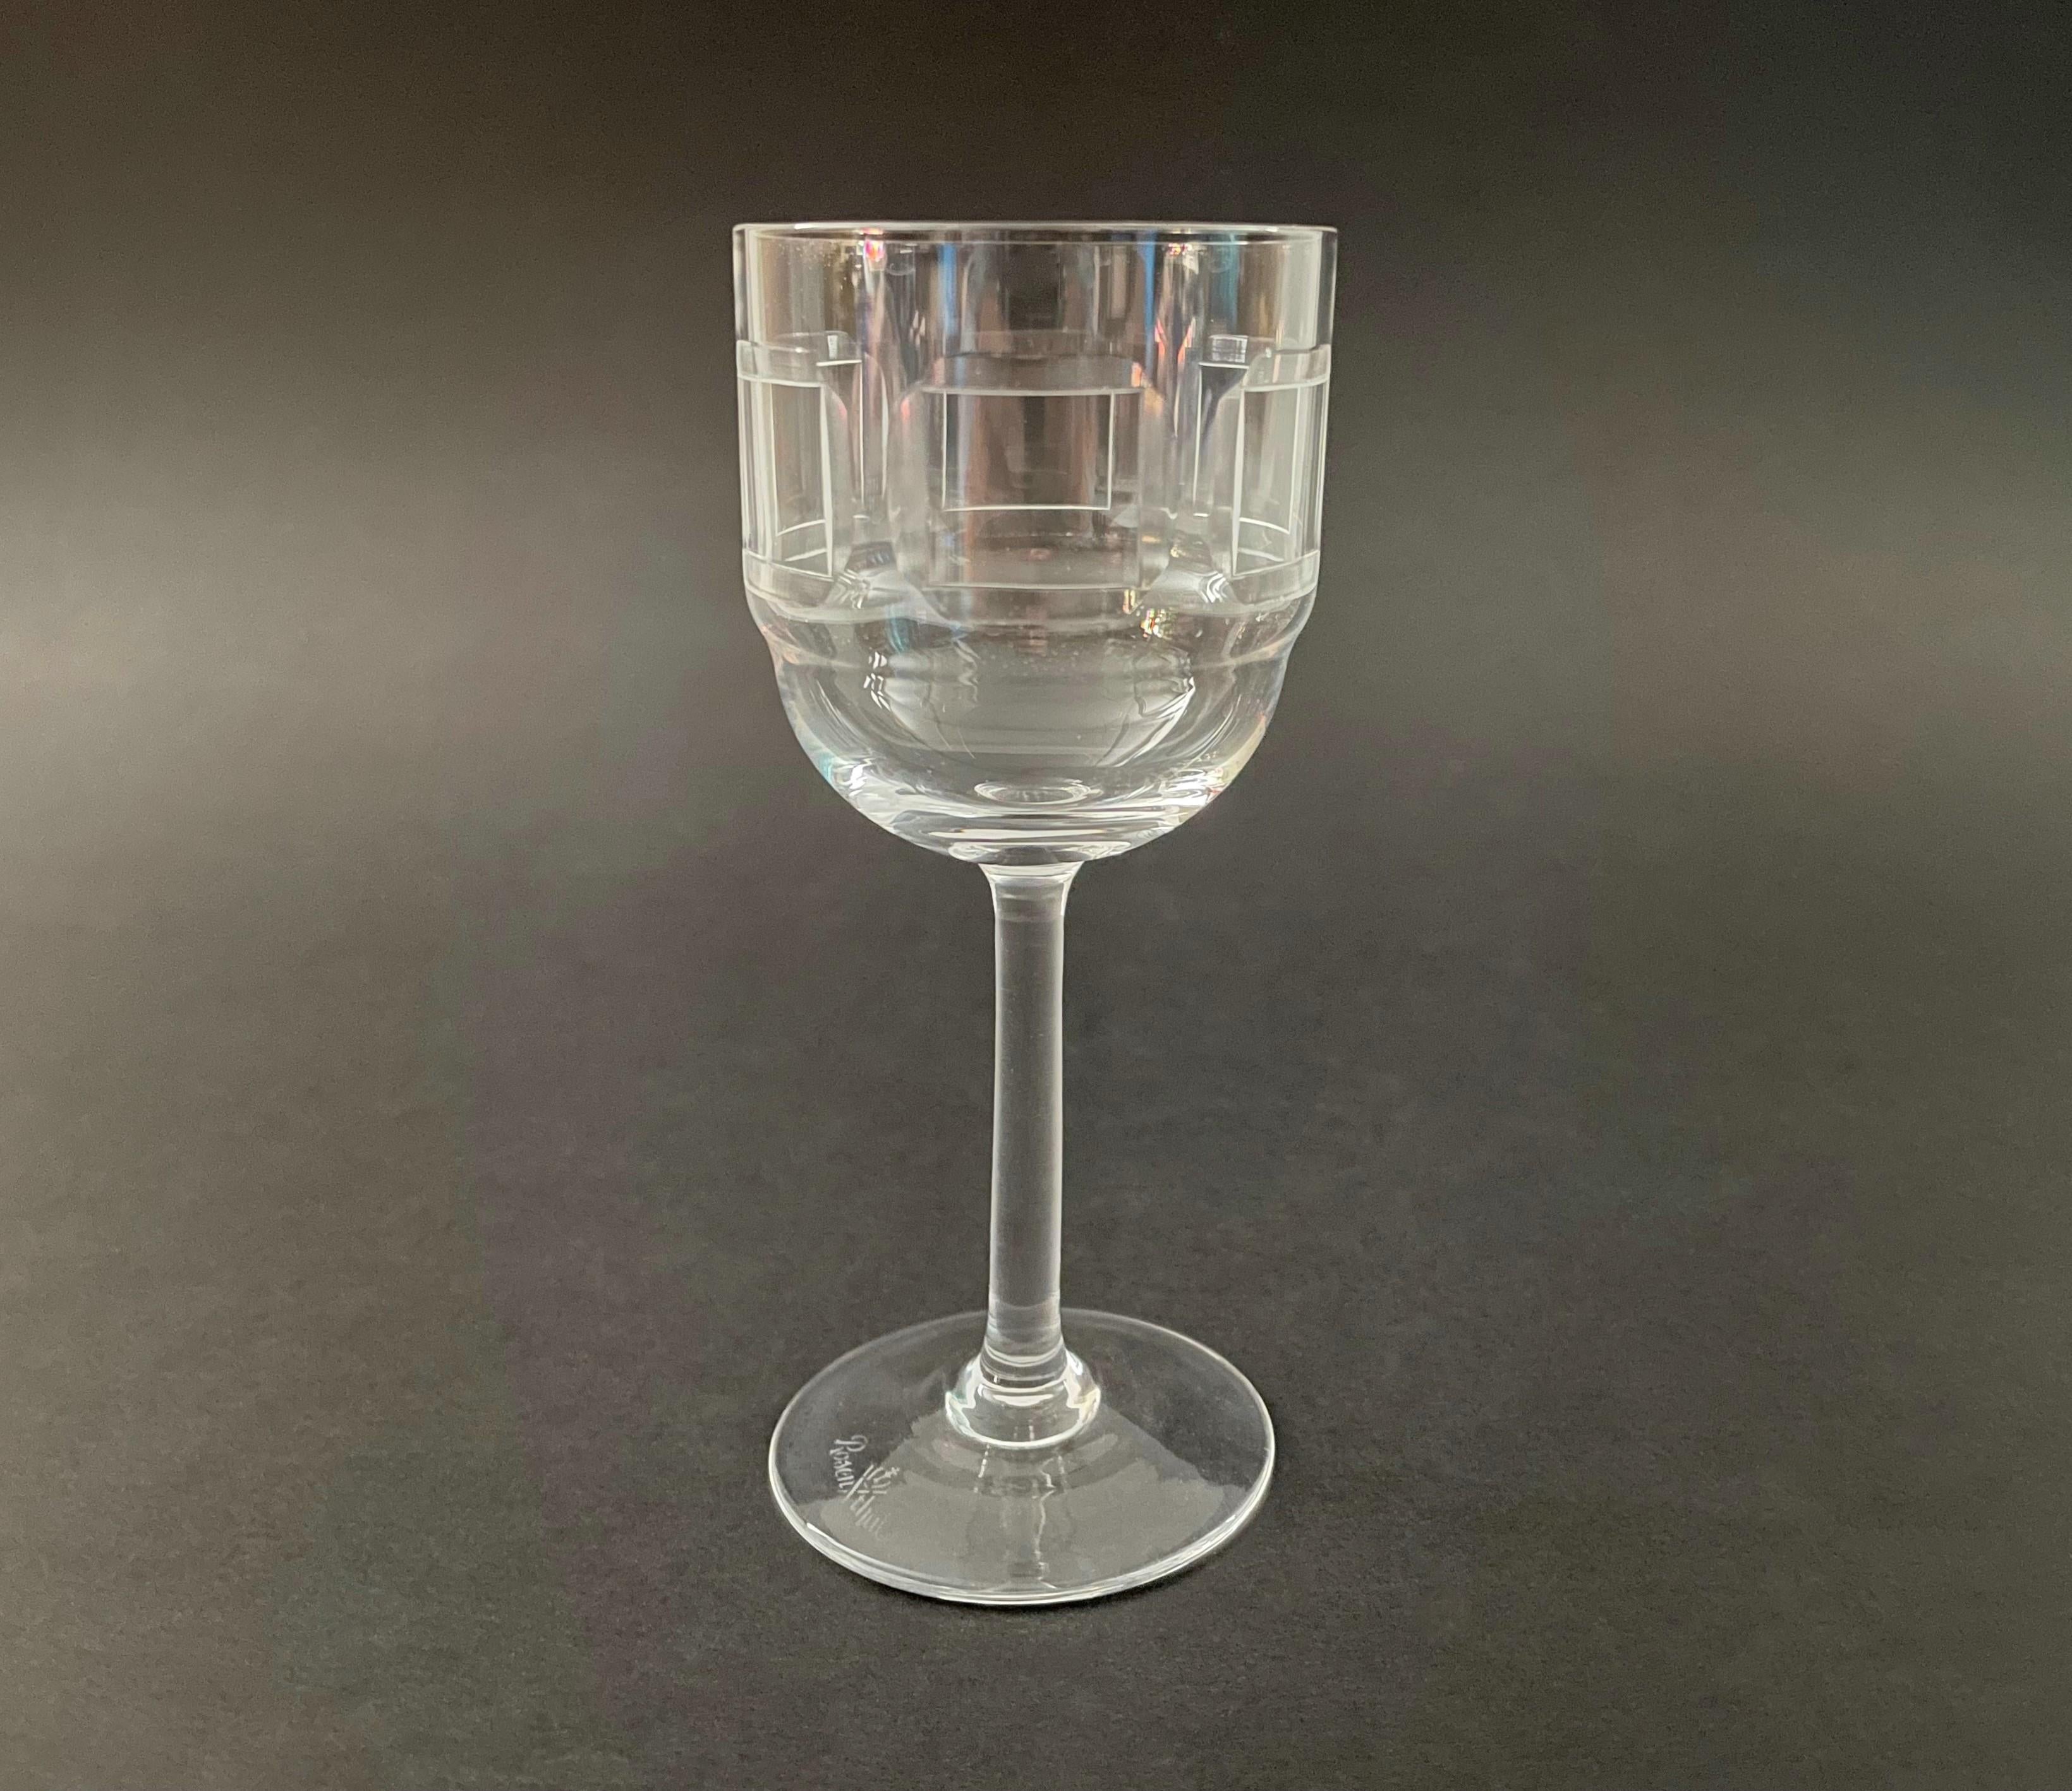 ROSENTHAL (Manufacturer) - SQUARES (Pattern) - Rare Mid Century wheel cut clear crystal liqueur glass - featuring a band of six engraved squares to the outside of the glass - signed on the base - Germany - circa 1960's.

Excellent / mint vintage